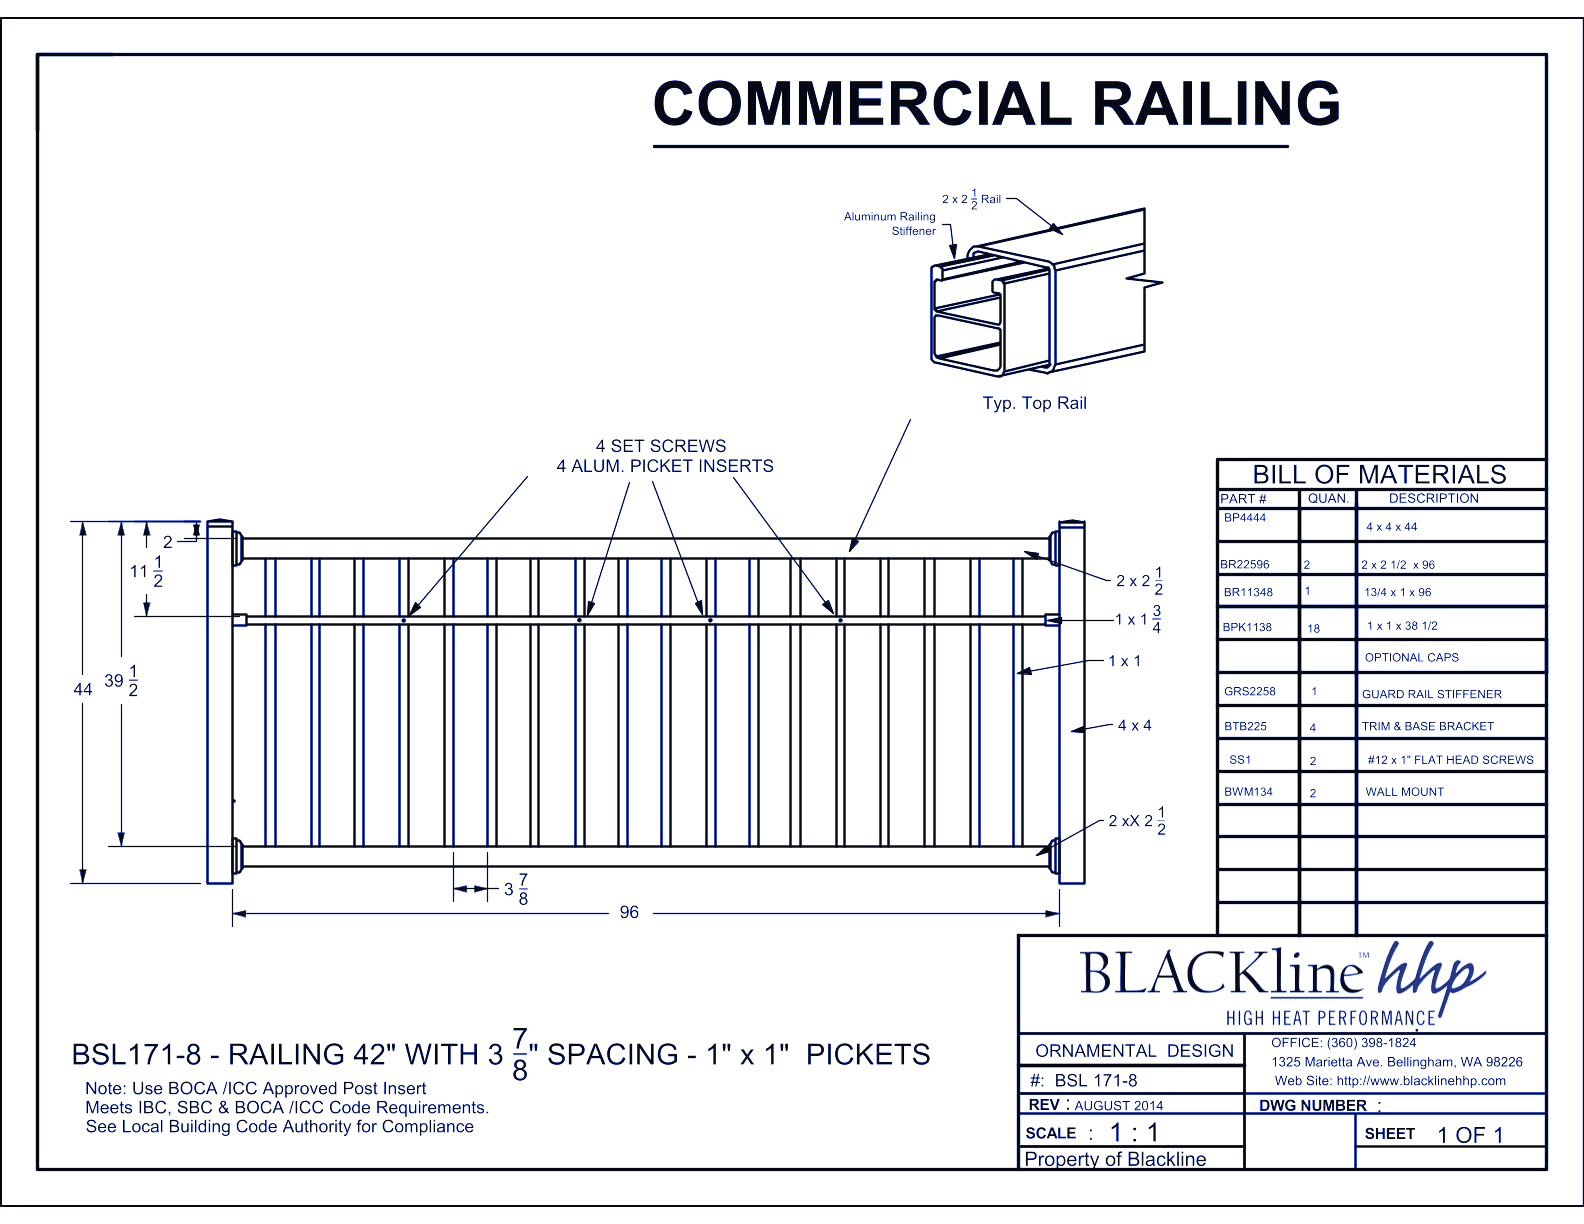 BSL171-8: Railing 42" with 3 7/8" Spacing - 1" x 1" Pickets